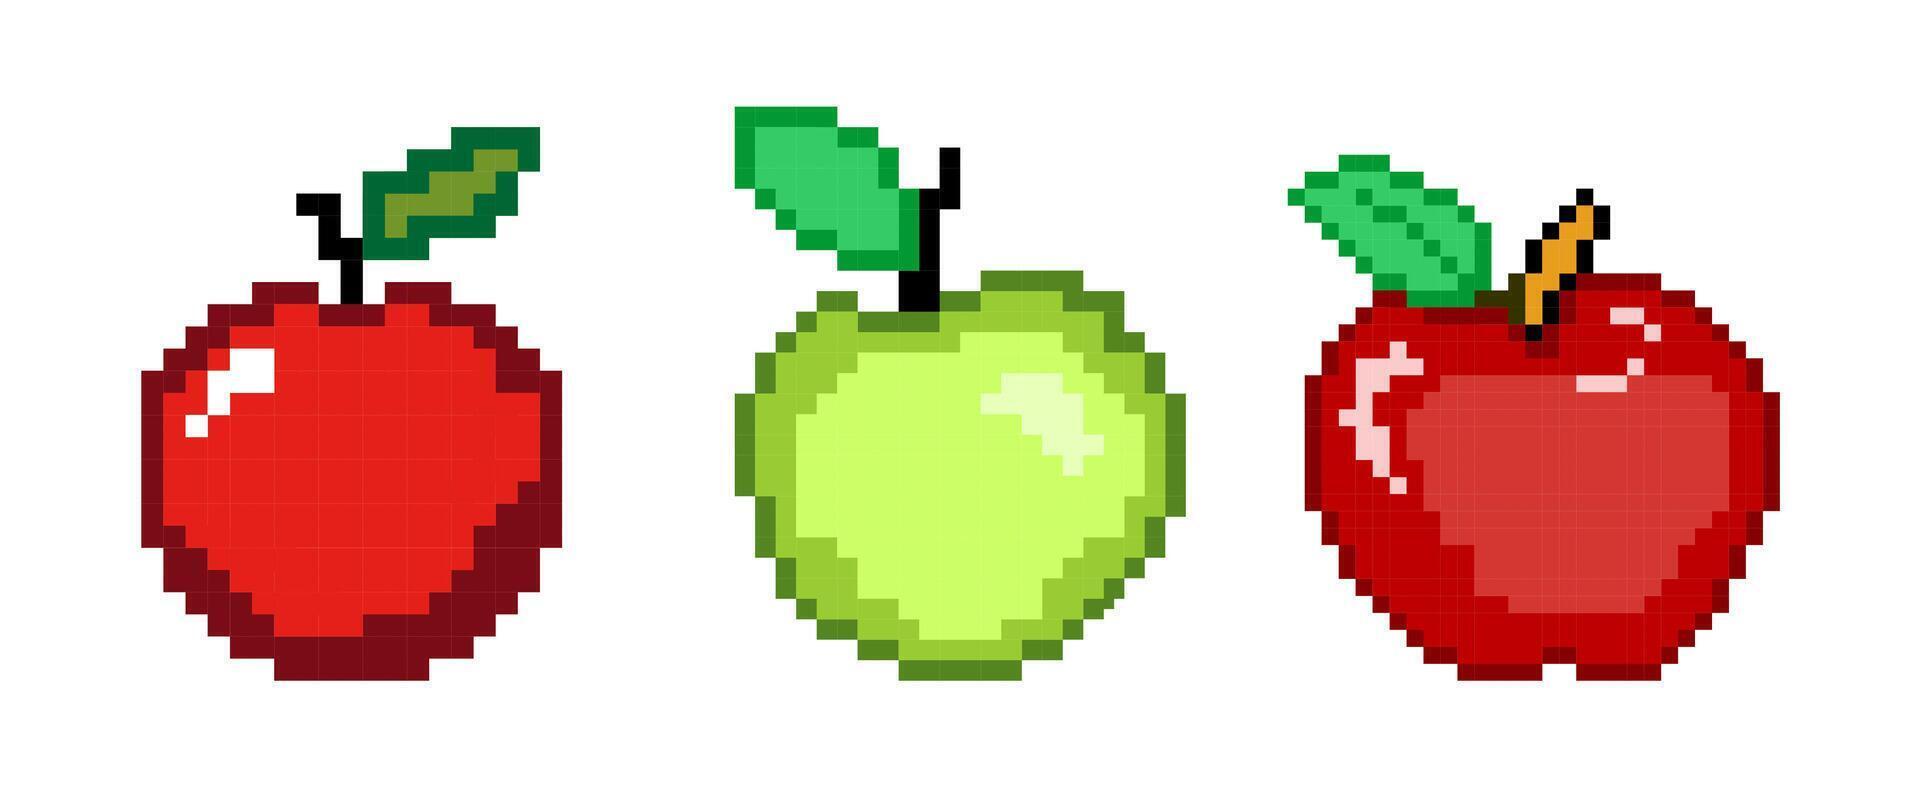 Apple pixel set vector isolated on white background. Pixelated fruit vector.